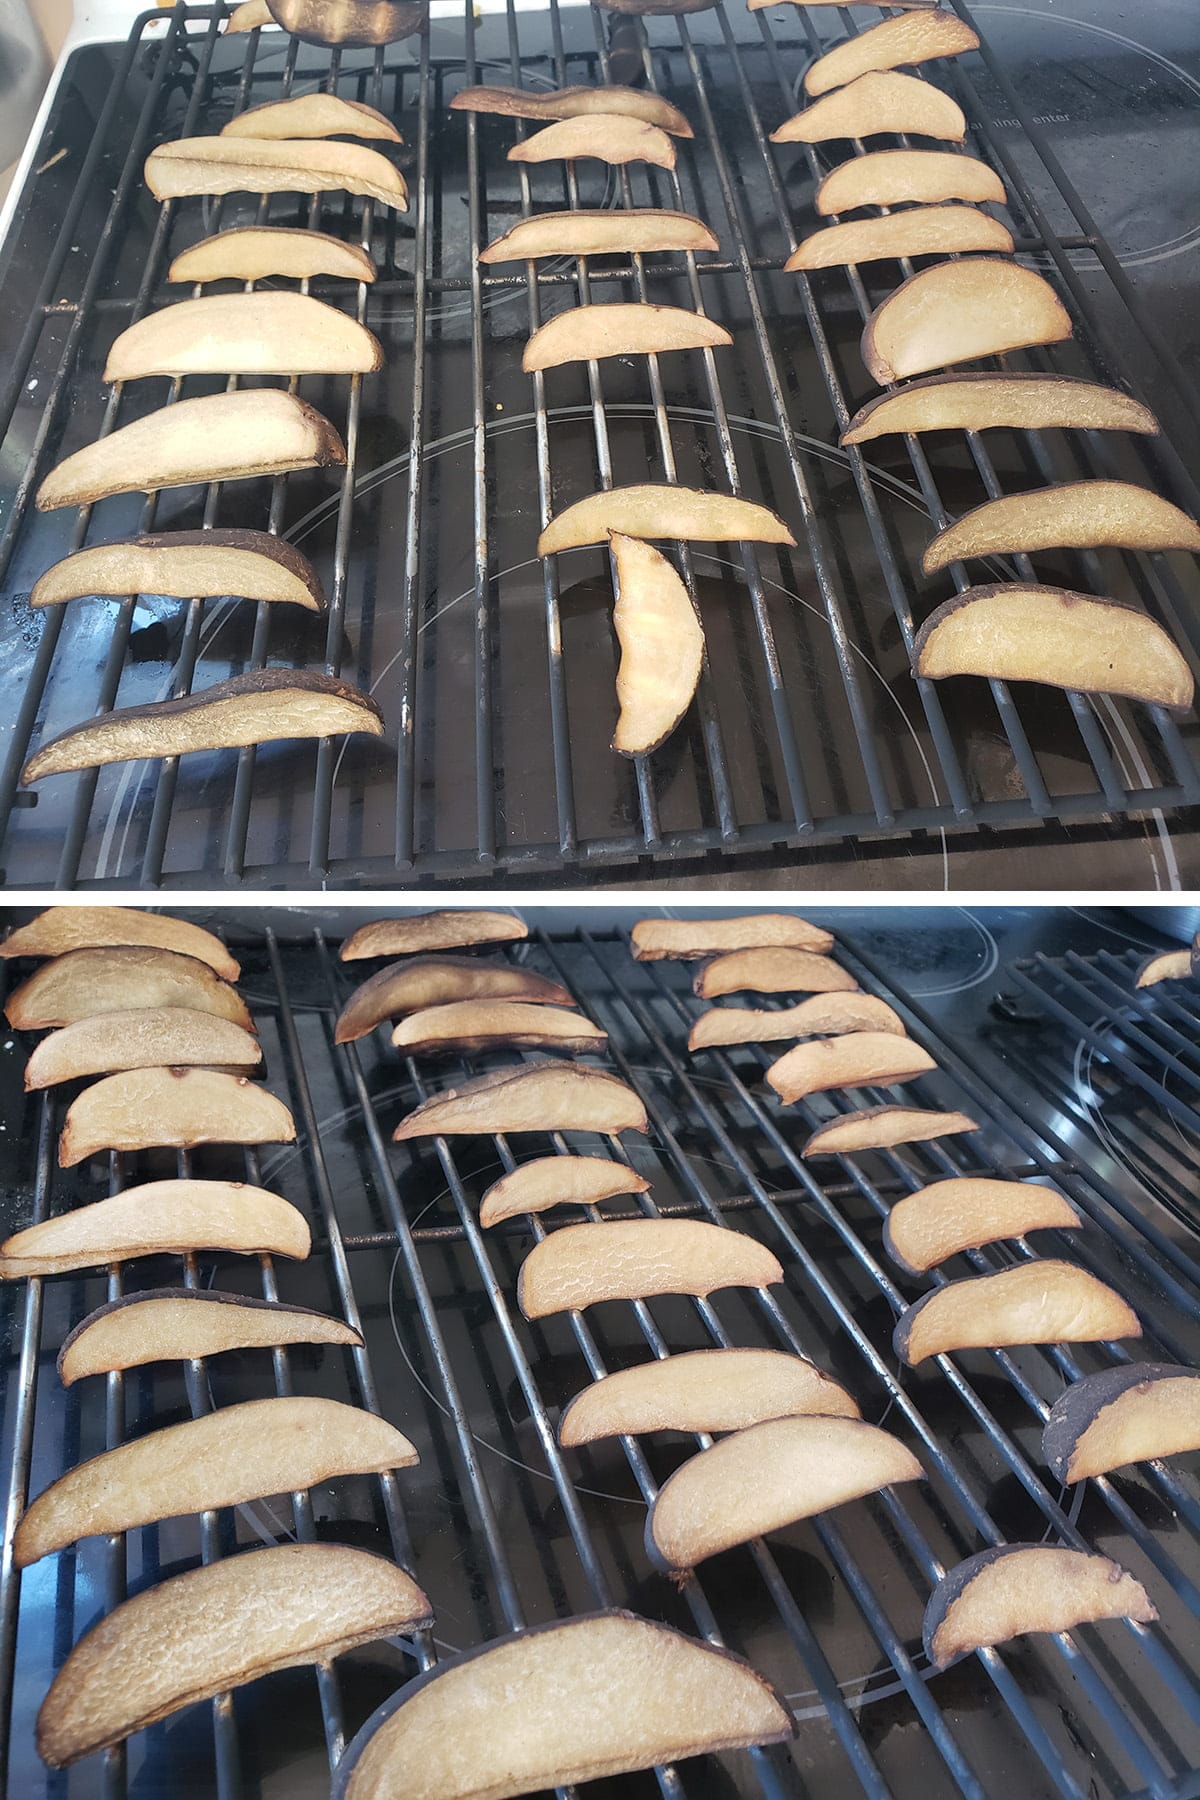 A two piece compilation image showing potatoes being smoked on racks.